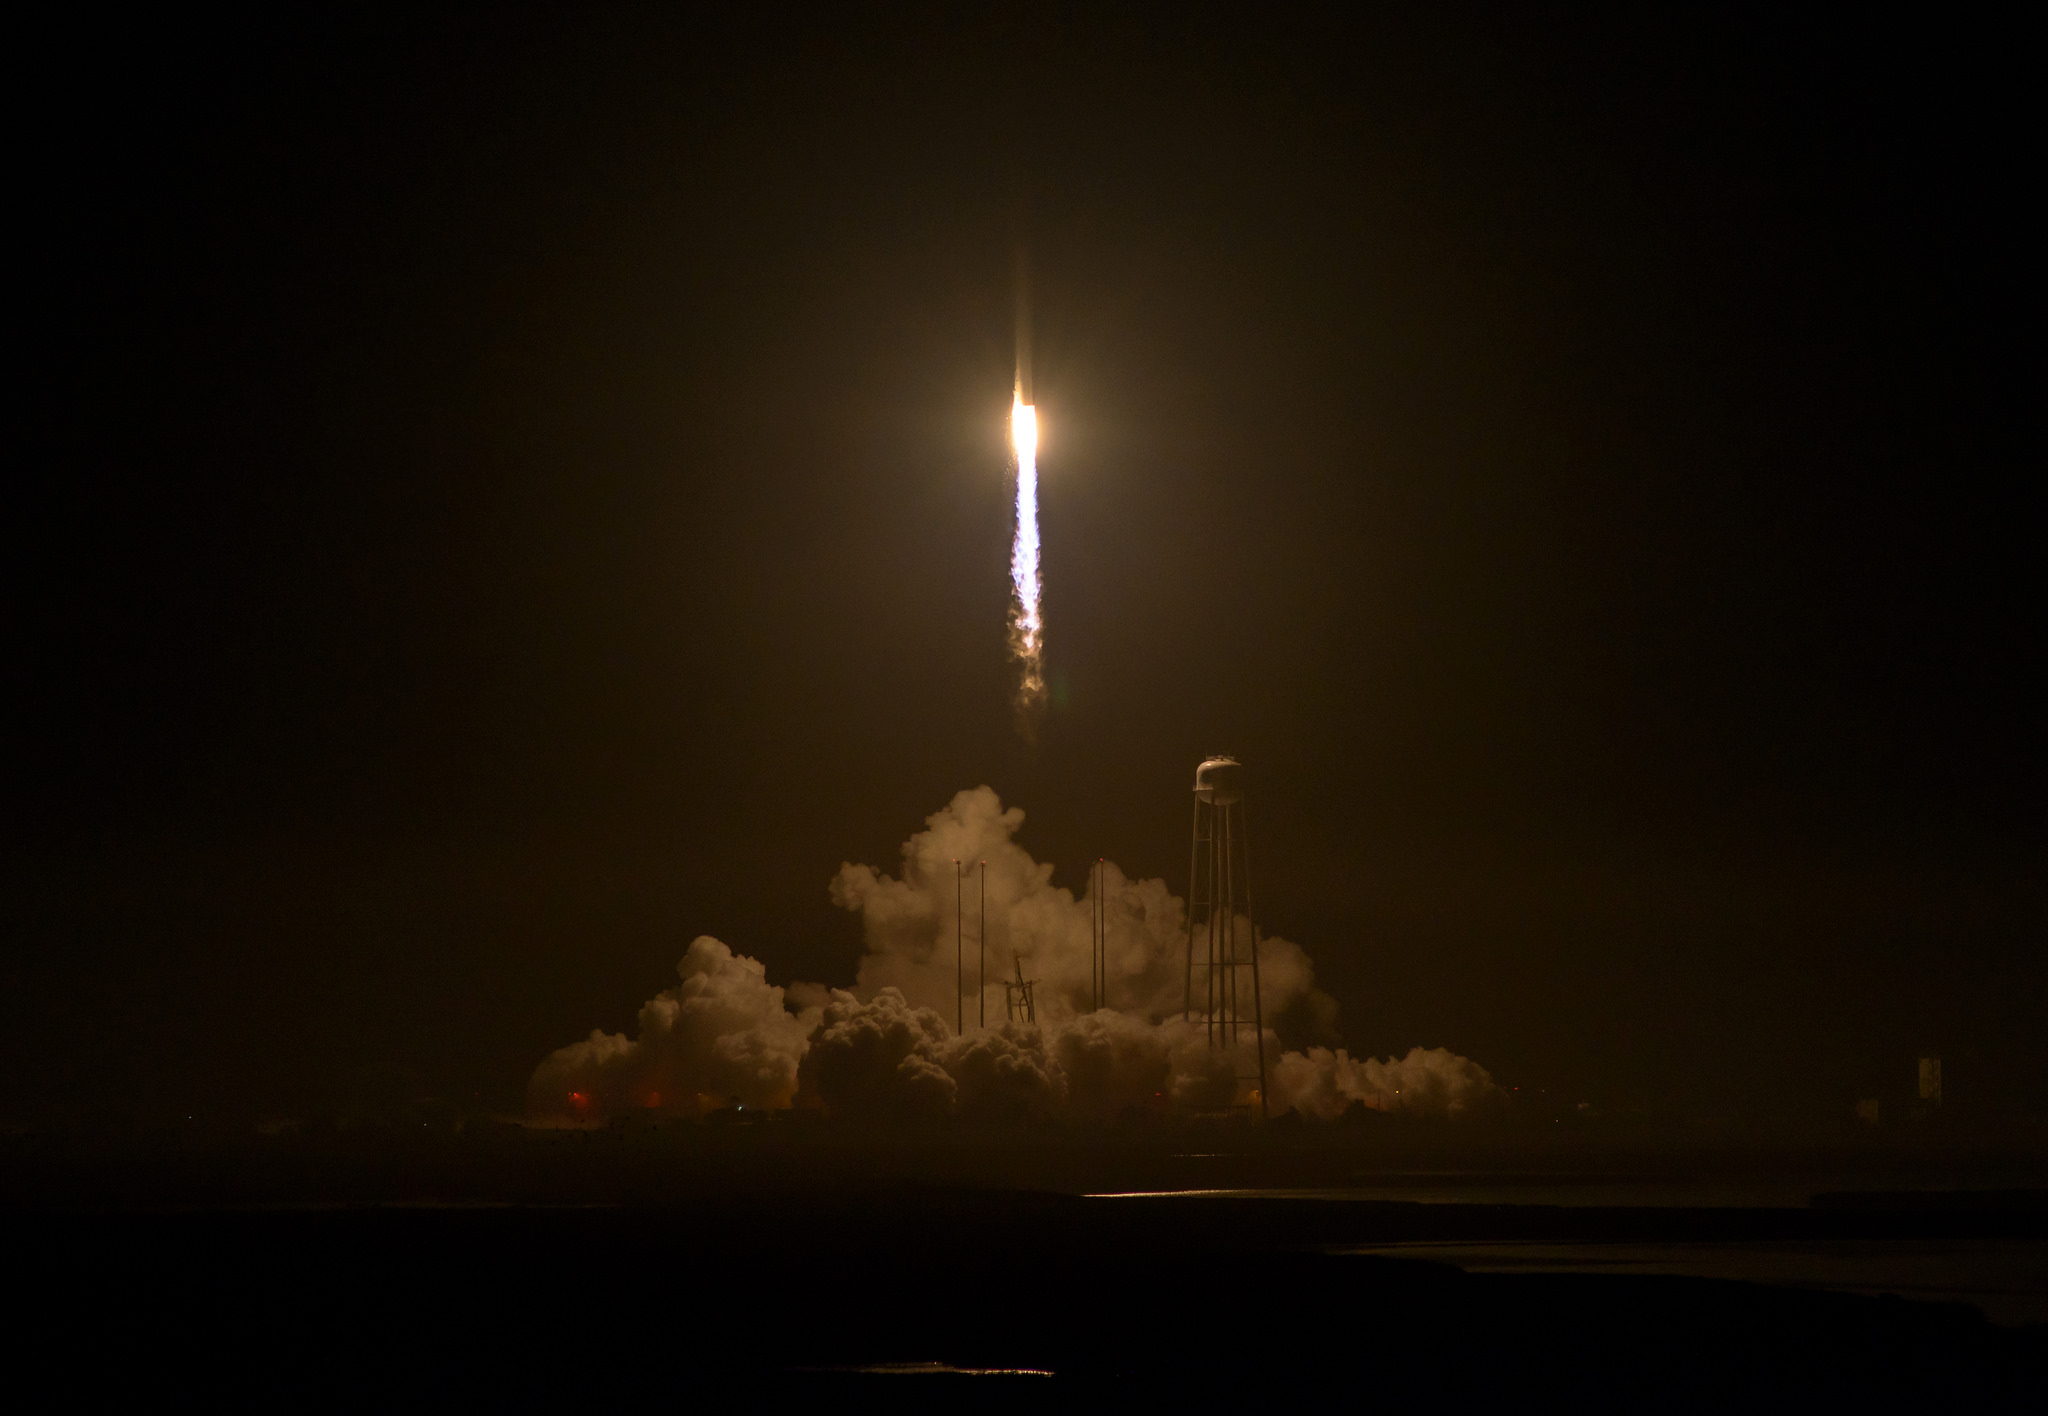 Orbital ATK's Antares Rocket Launch Success Lauded by Space Experts